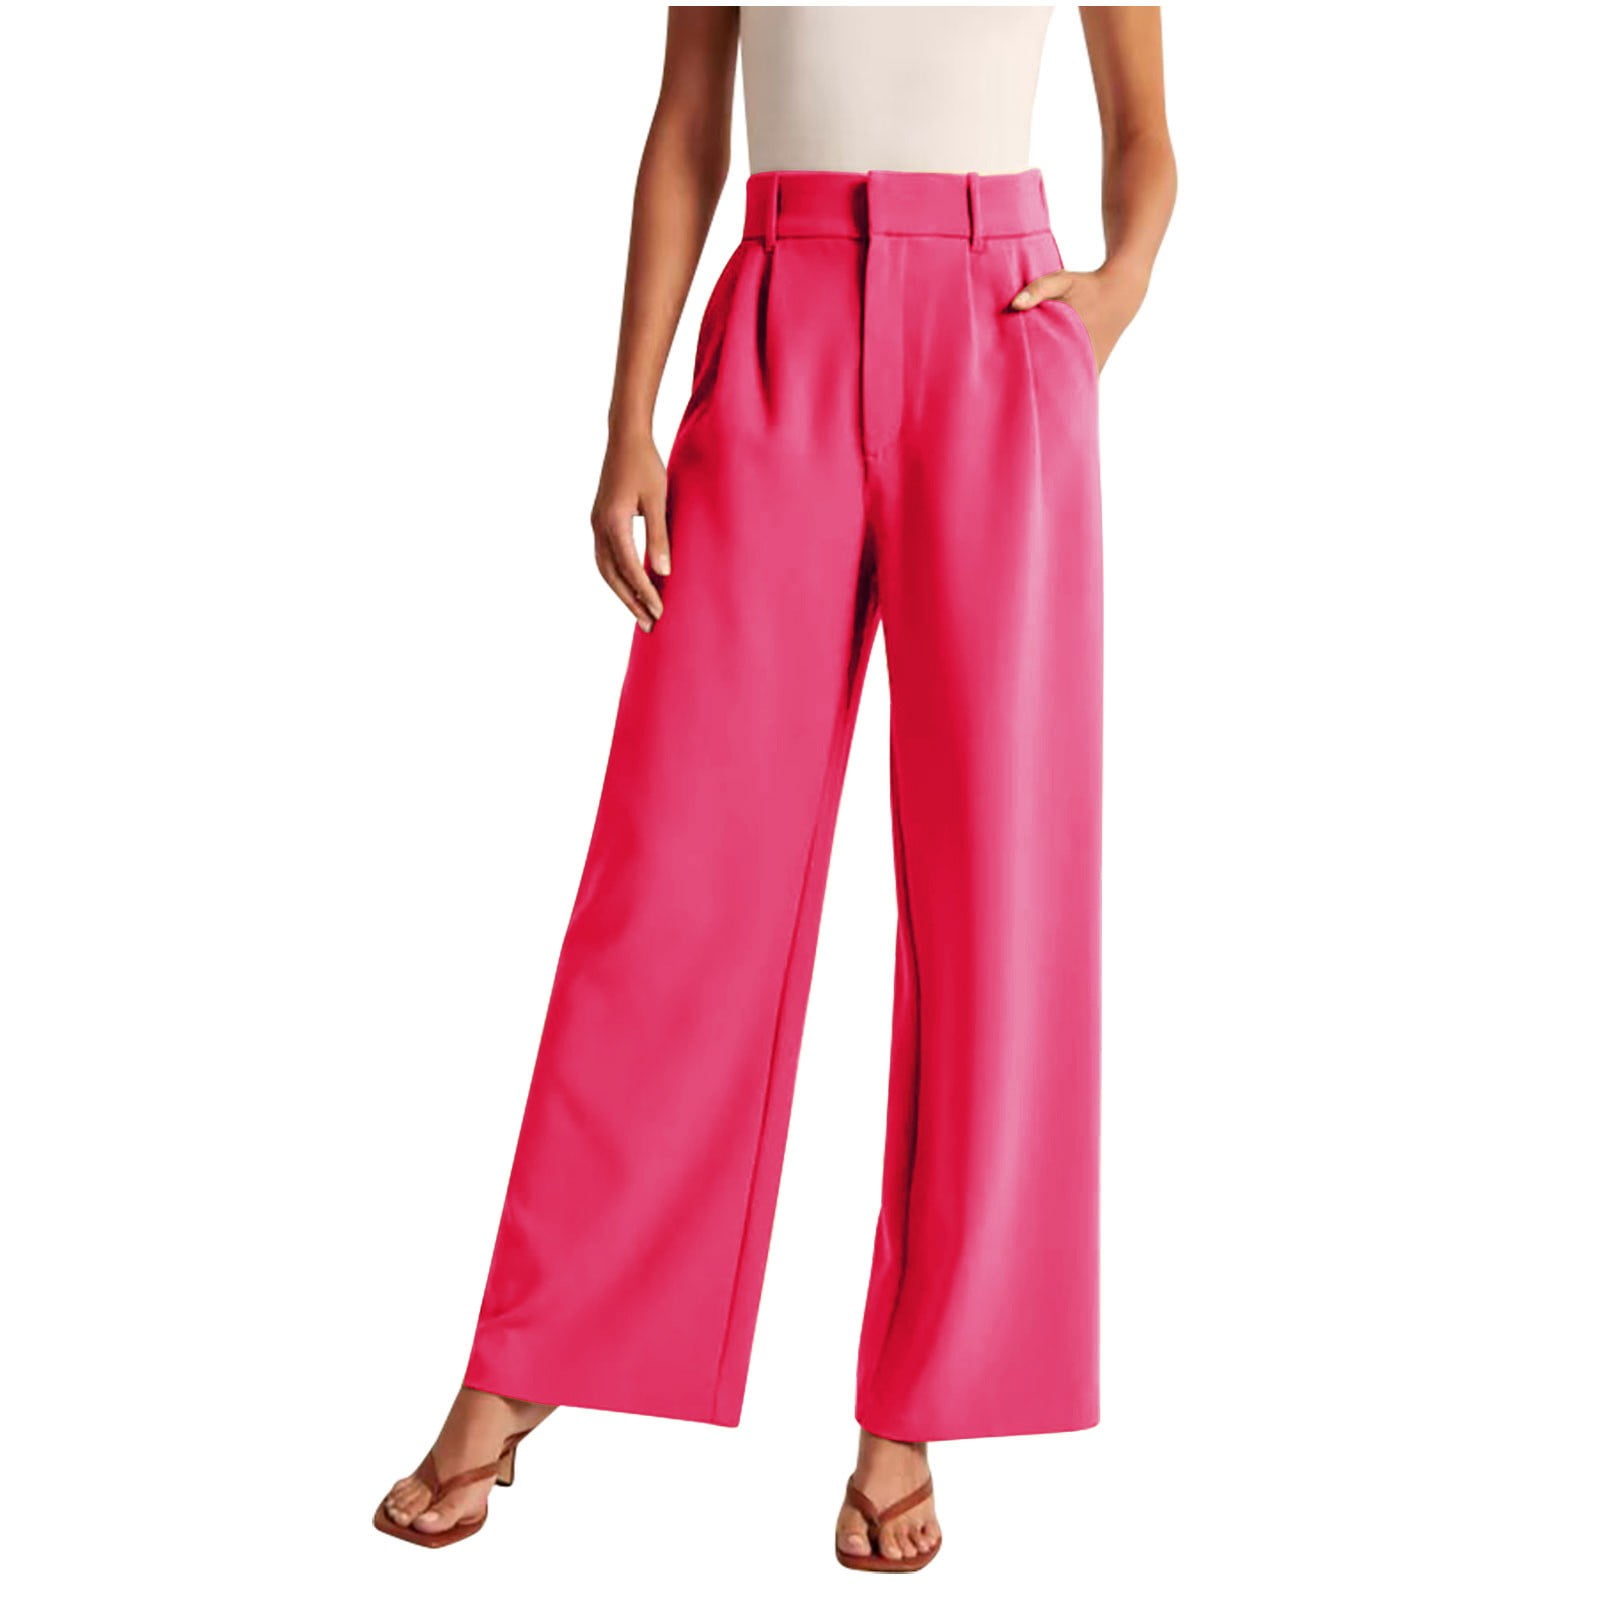 Bossy Pants Wide Leg Trousers – The Sweet Life Apparel and Gifts